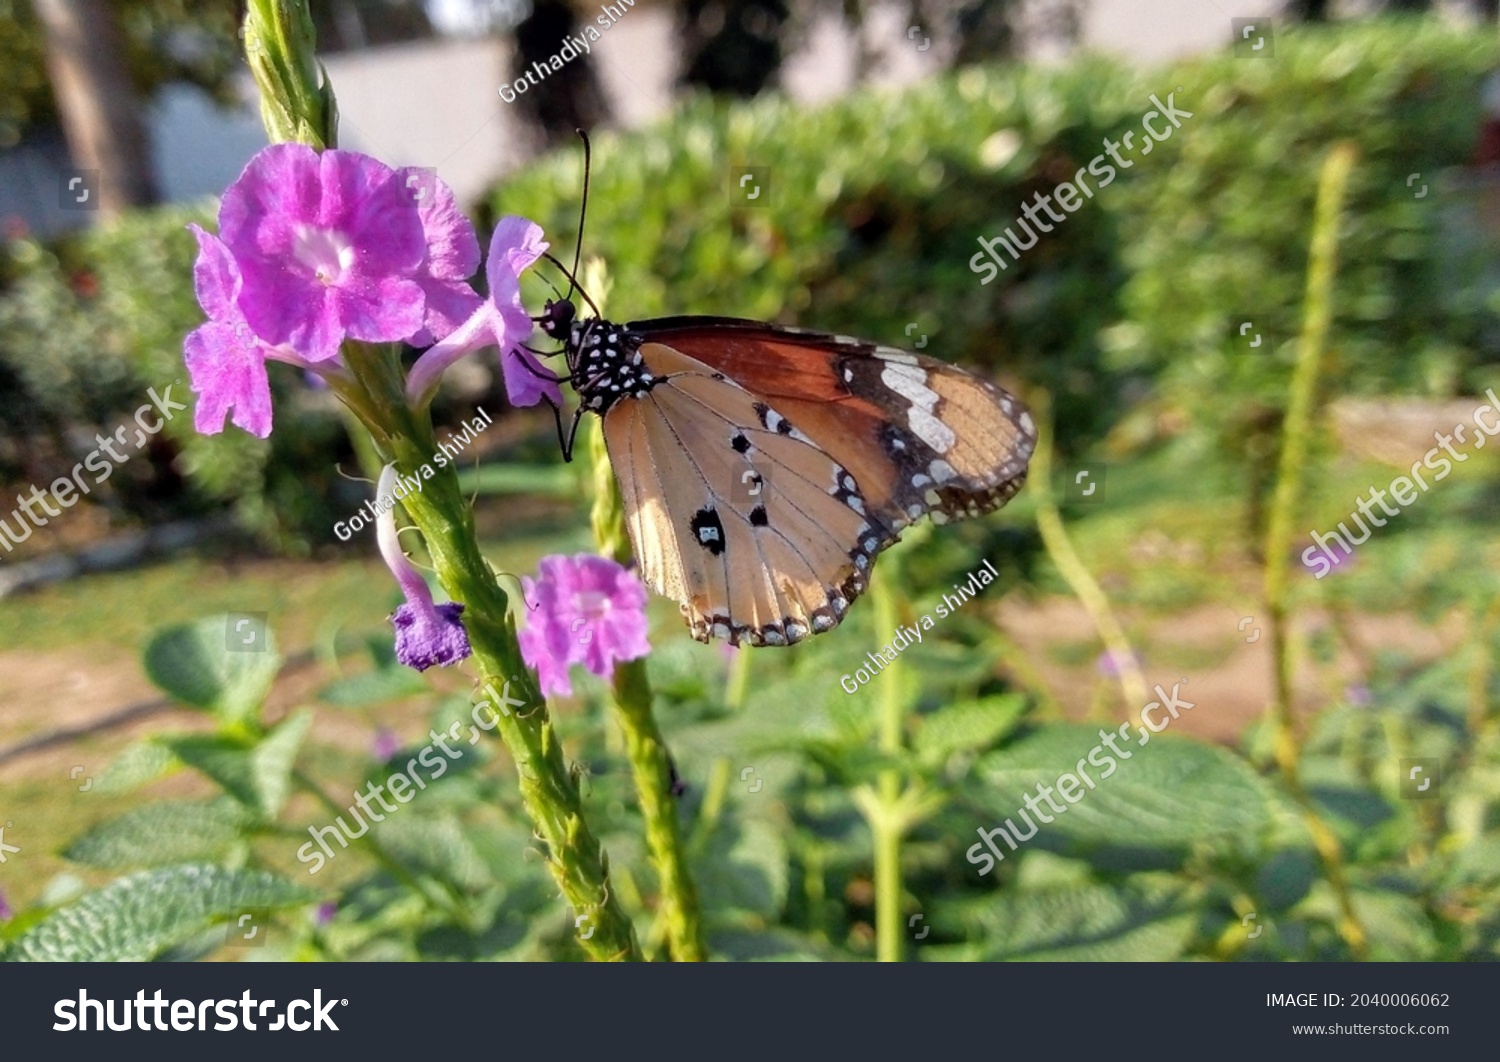 Close up of Plain Tiger (Danaus chrysippus) butterfly visiting flower in nature. A beautiful Plain Tiger butterfly. Nature's artwork in the form of a plain tiger butterfly. Image #2040006062